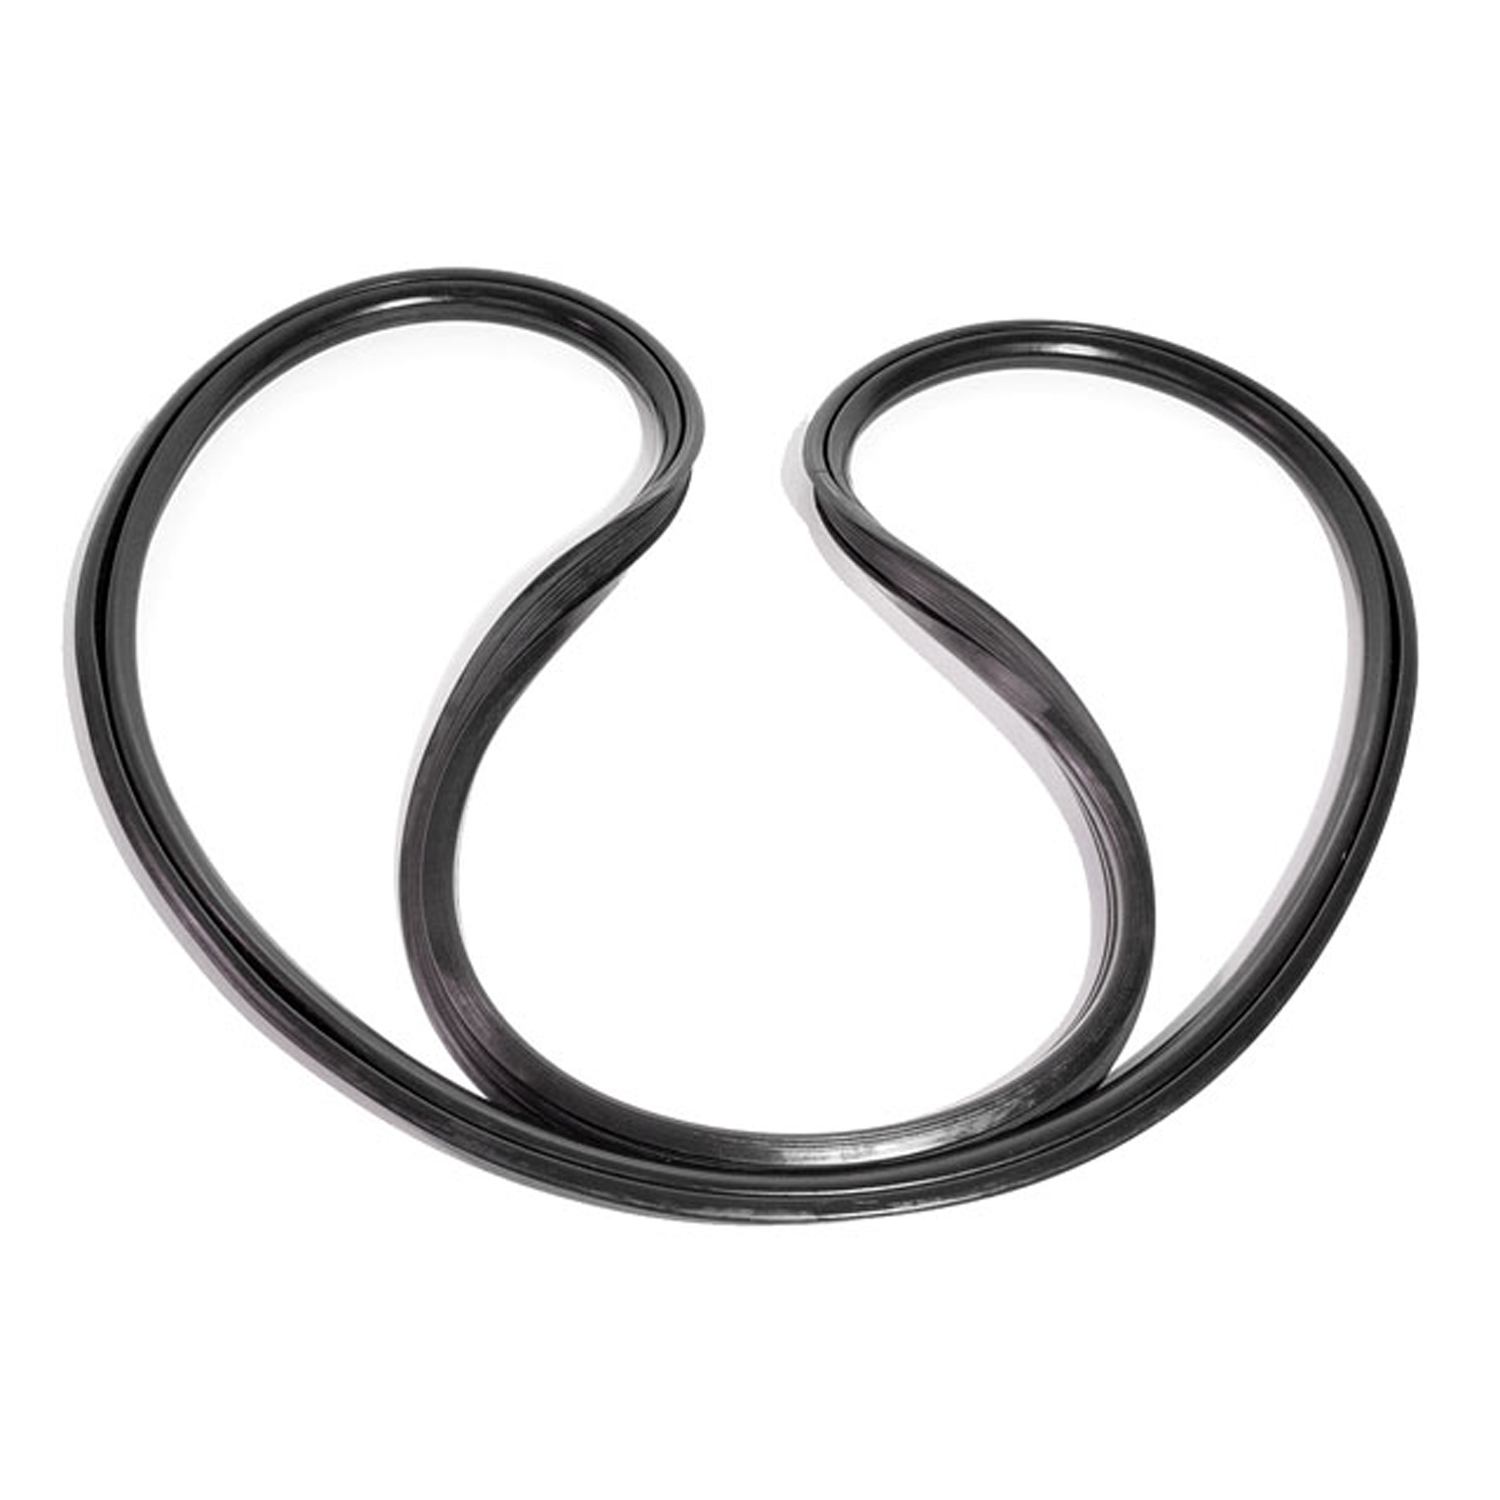 1951 Oldsmobile Deluxe 88 Vulcanized Windshield Seal.  For hardtops and convertibles-VWS 7300